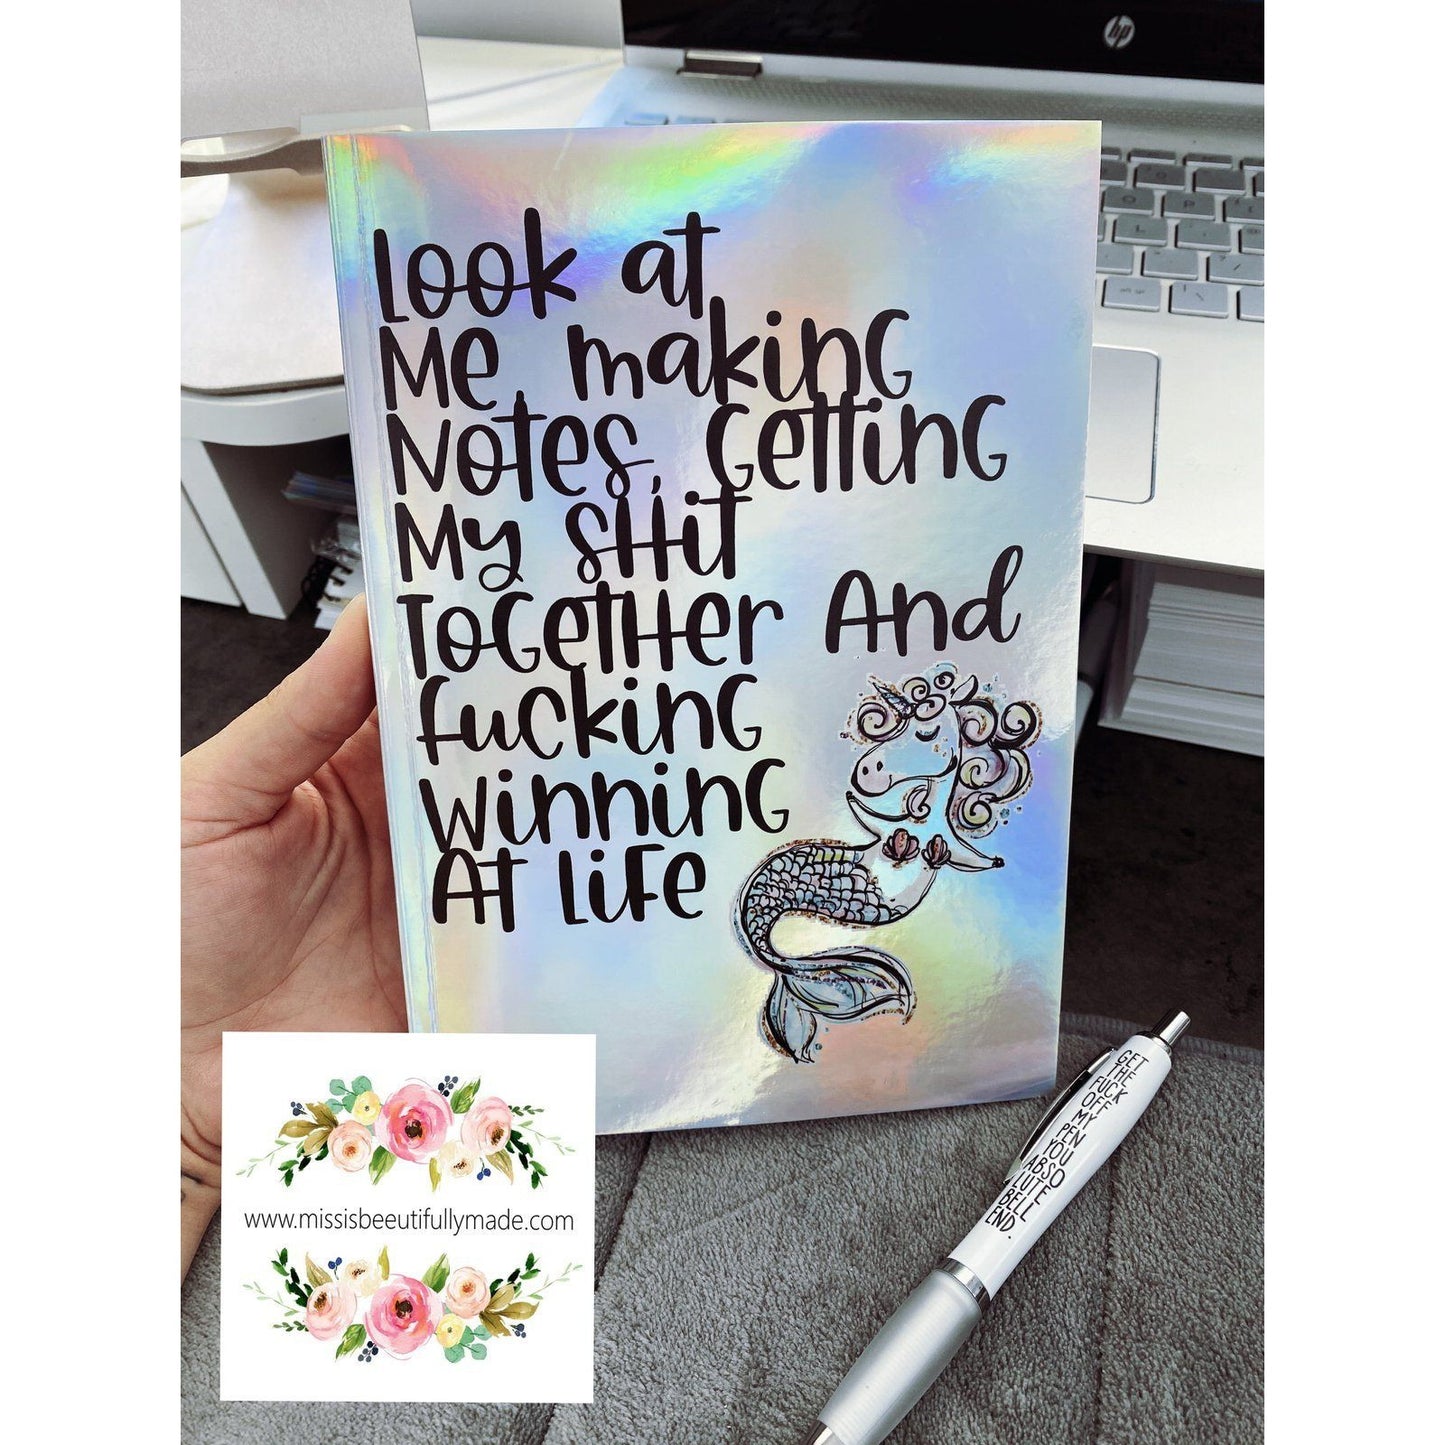 Iridescent Notebook - Mermaid, look at me making notes